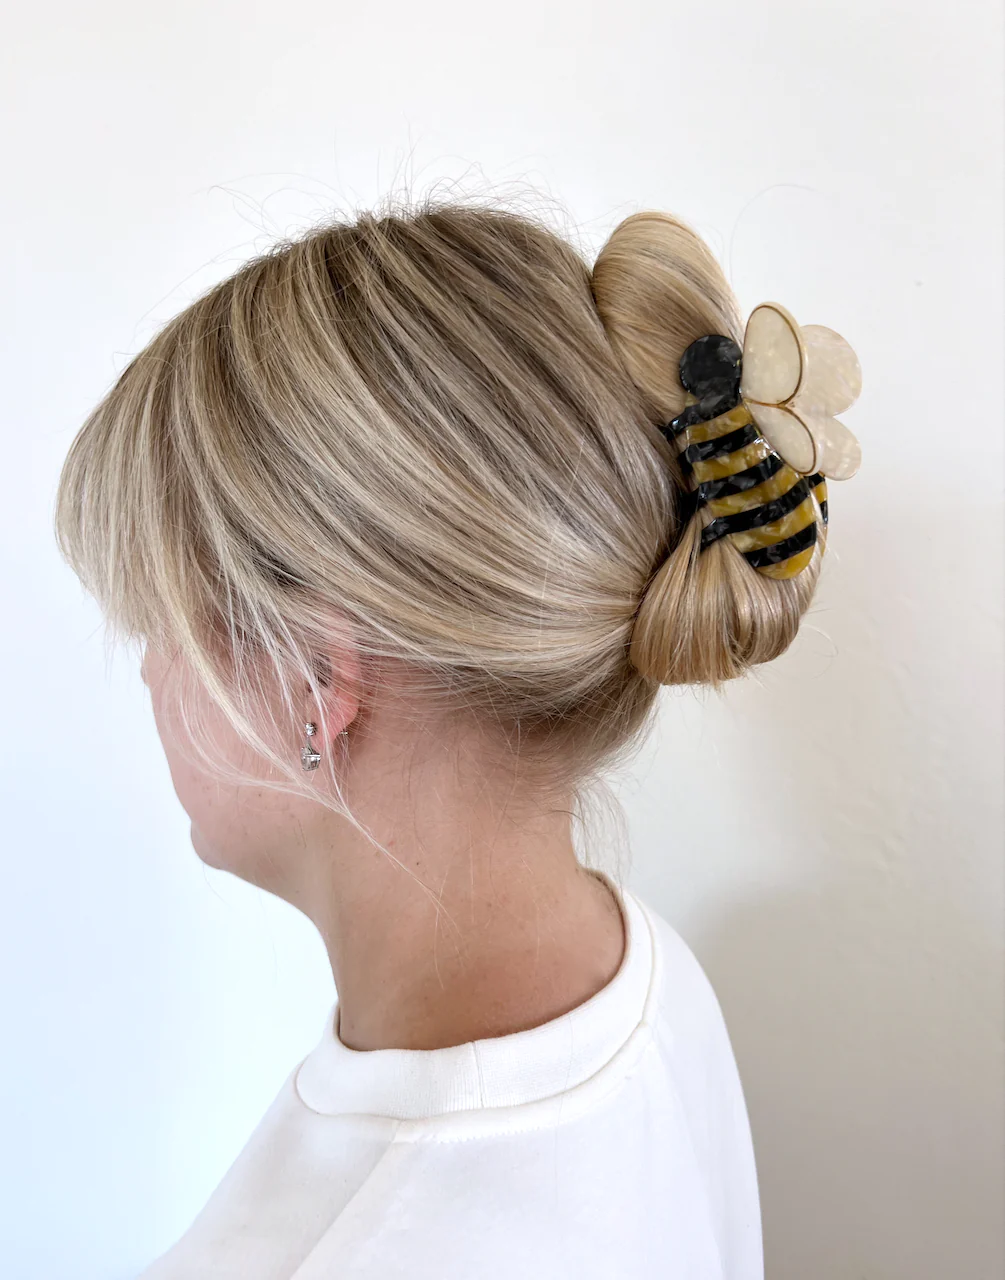 THE BUMBLE BEE CLIP IN USE HOLDING SOMEONE HAIR UP. 